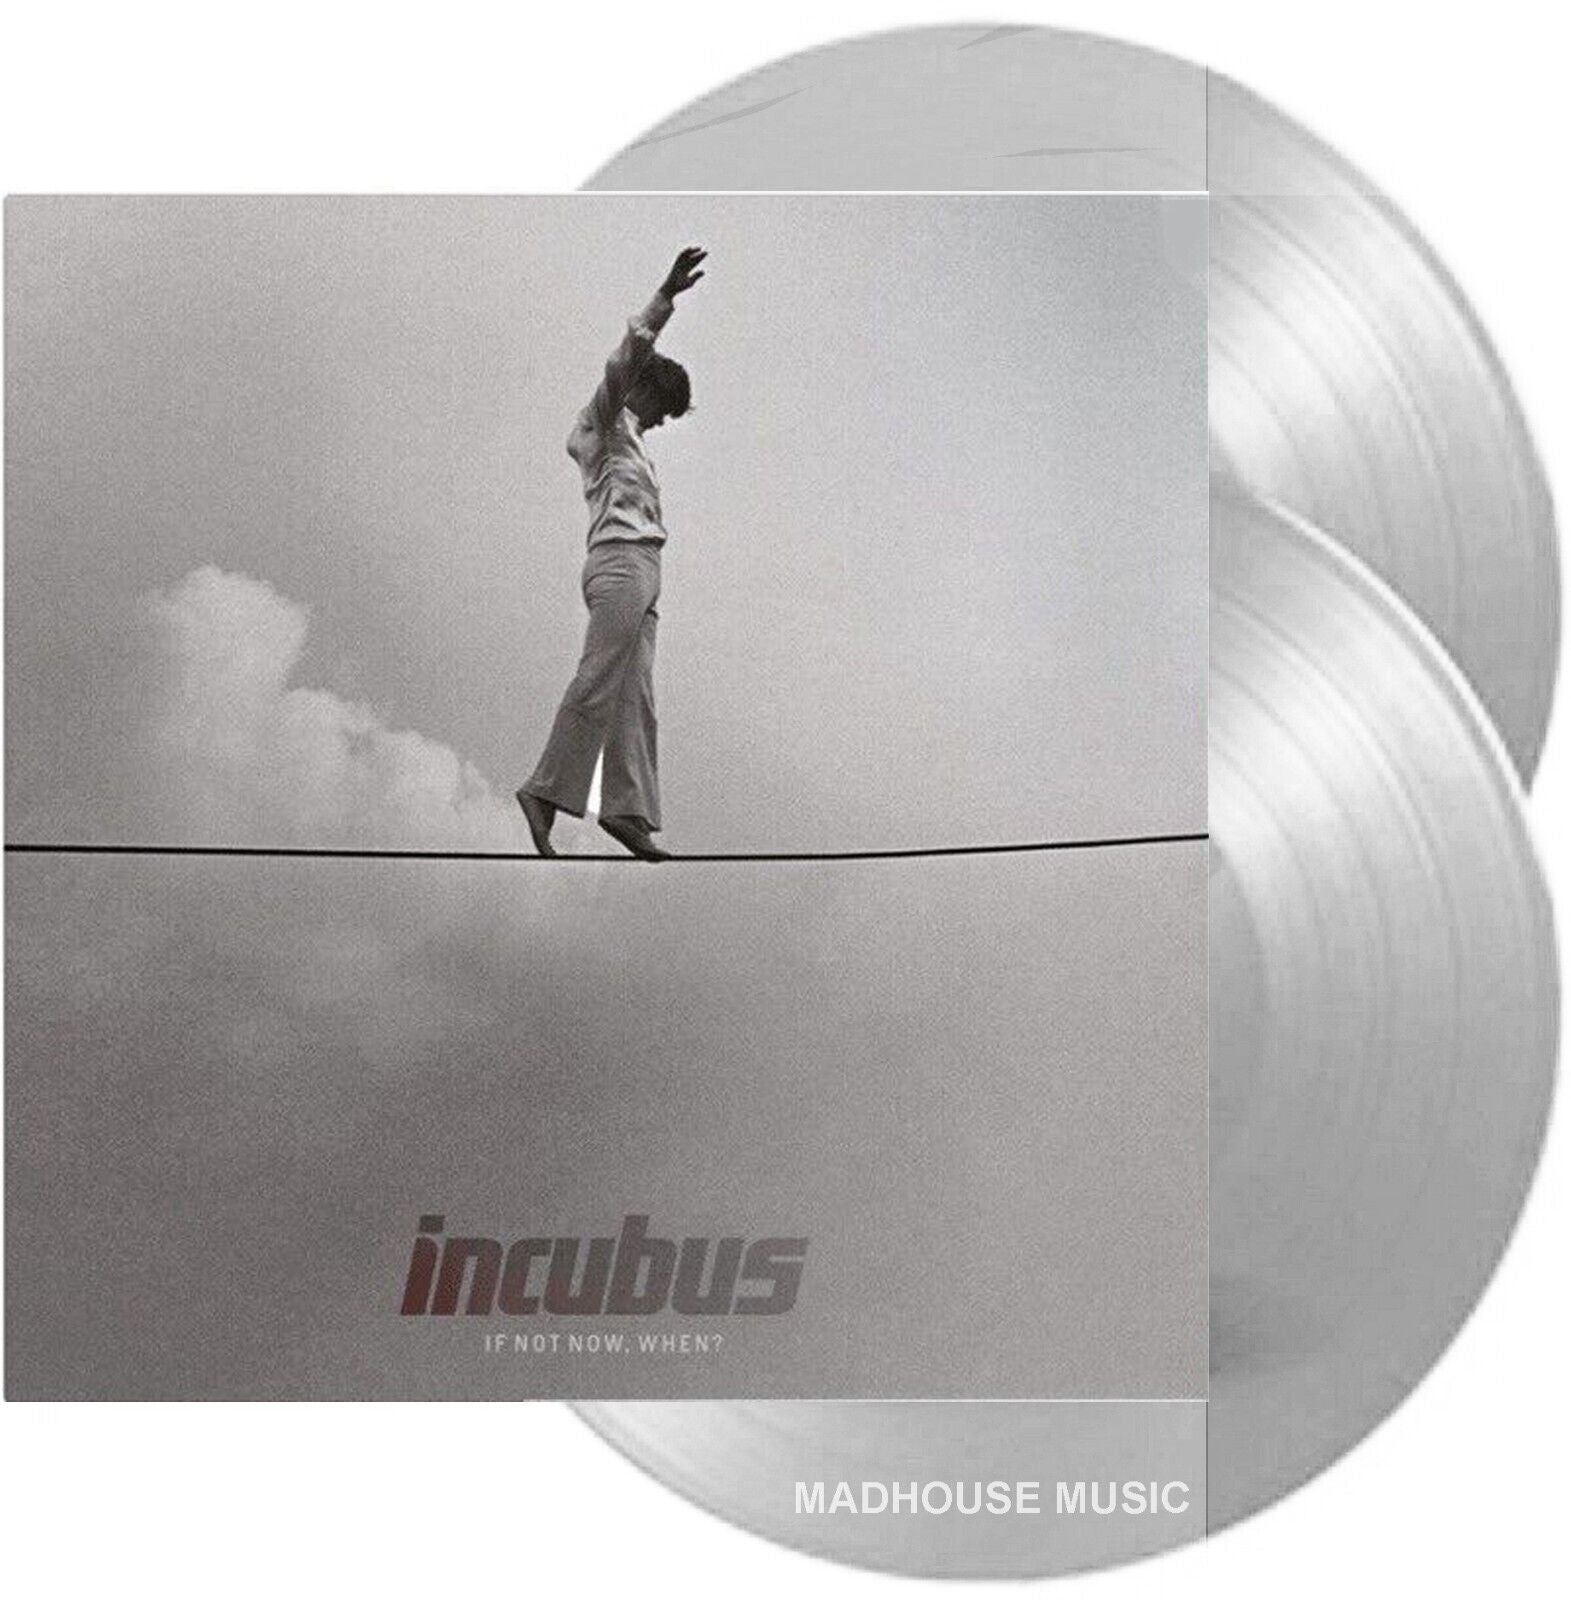 Incubus – If Not Now, When? 2LP LTD White Marbled Vinyl